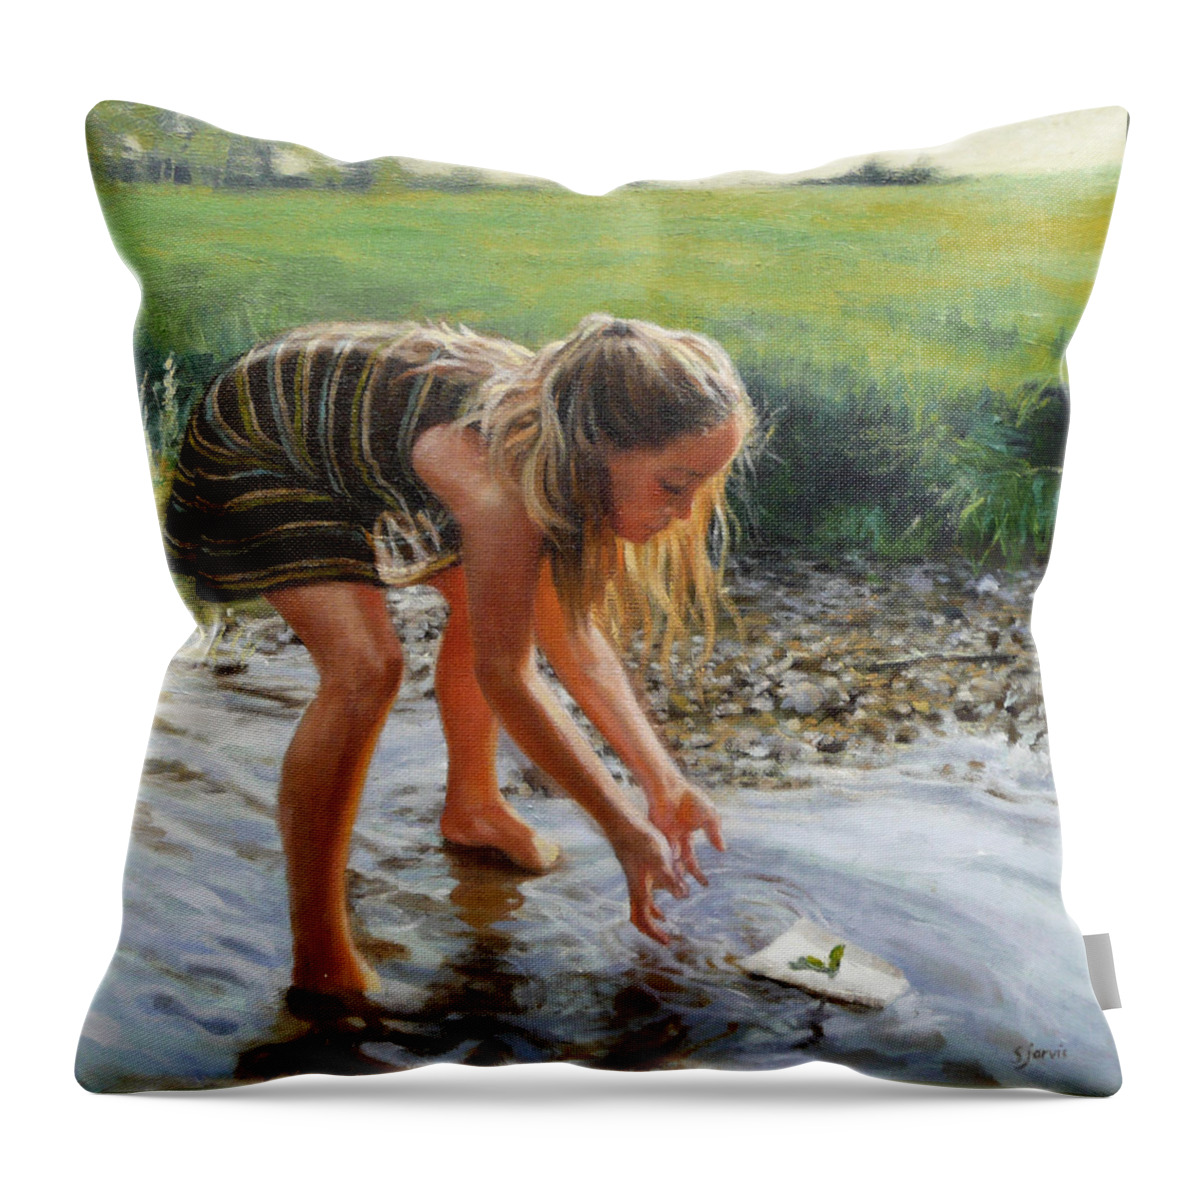 Girl Throw Pillow featuring the painting Maiden Voyage by Susan N Jarvis